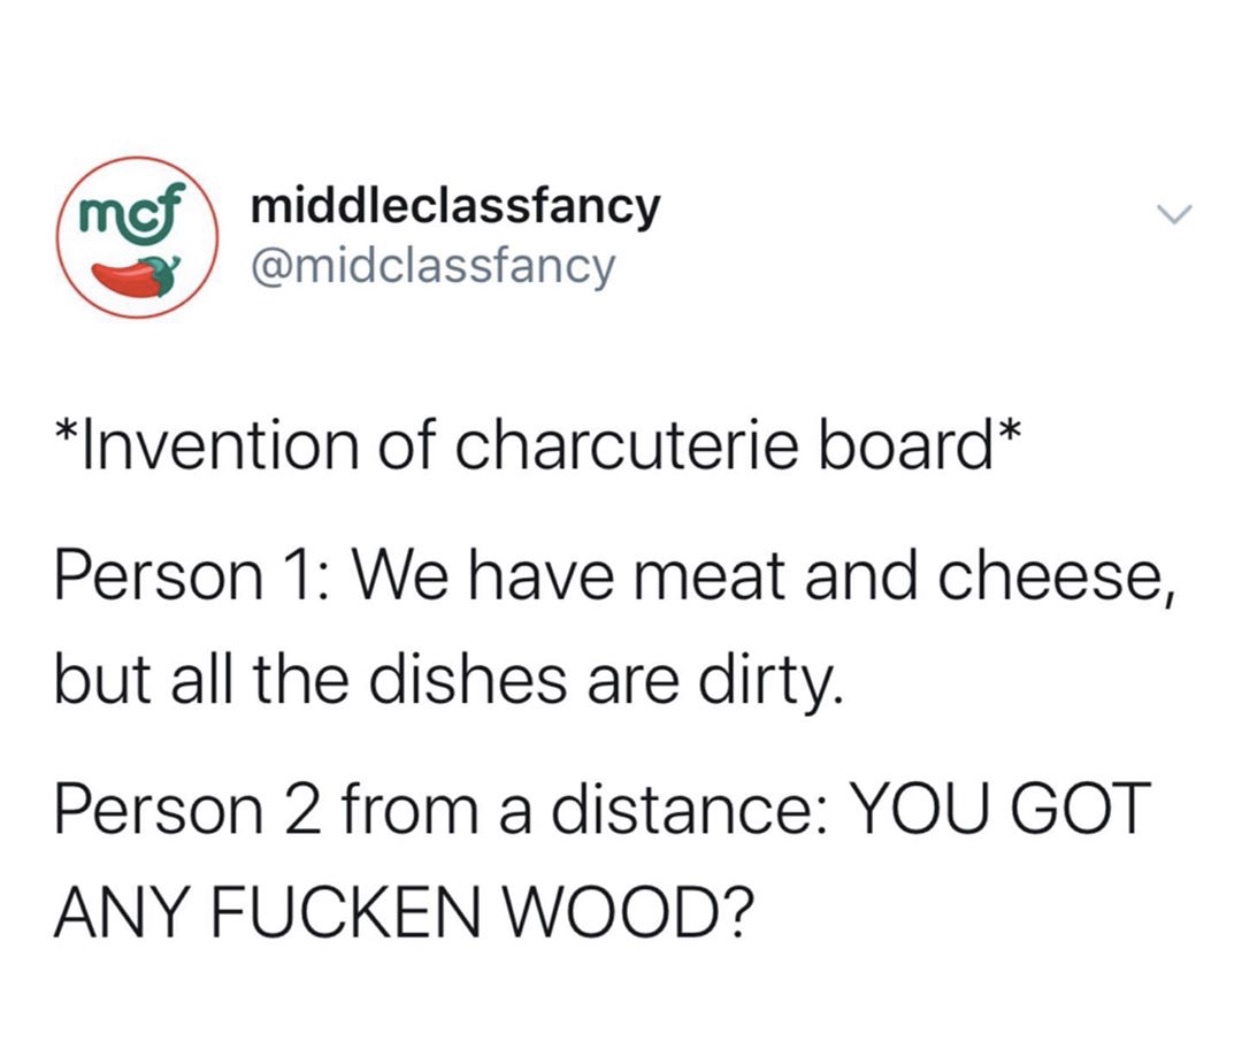 angle - mof middleclassfancy Invention of charcuterie board Person 1 We have meat and cheese, but all the dishes are dirty. Person 2 from a distance You Got Any Fucken Wood?